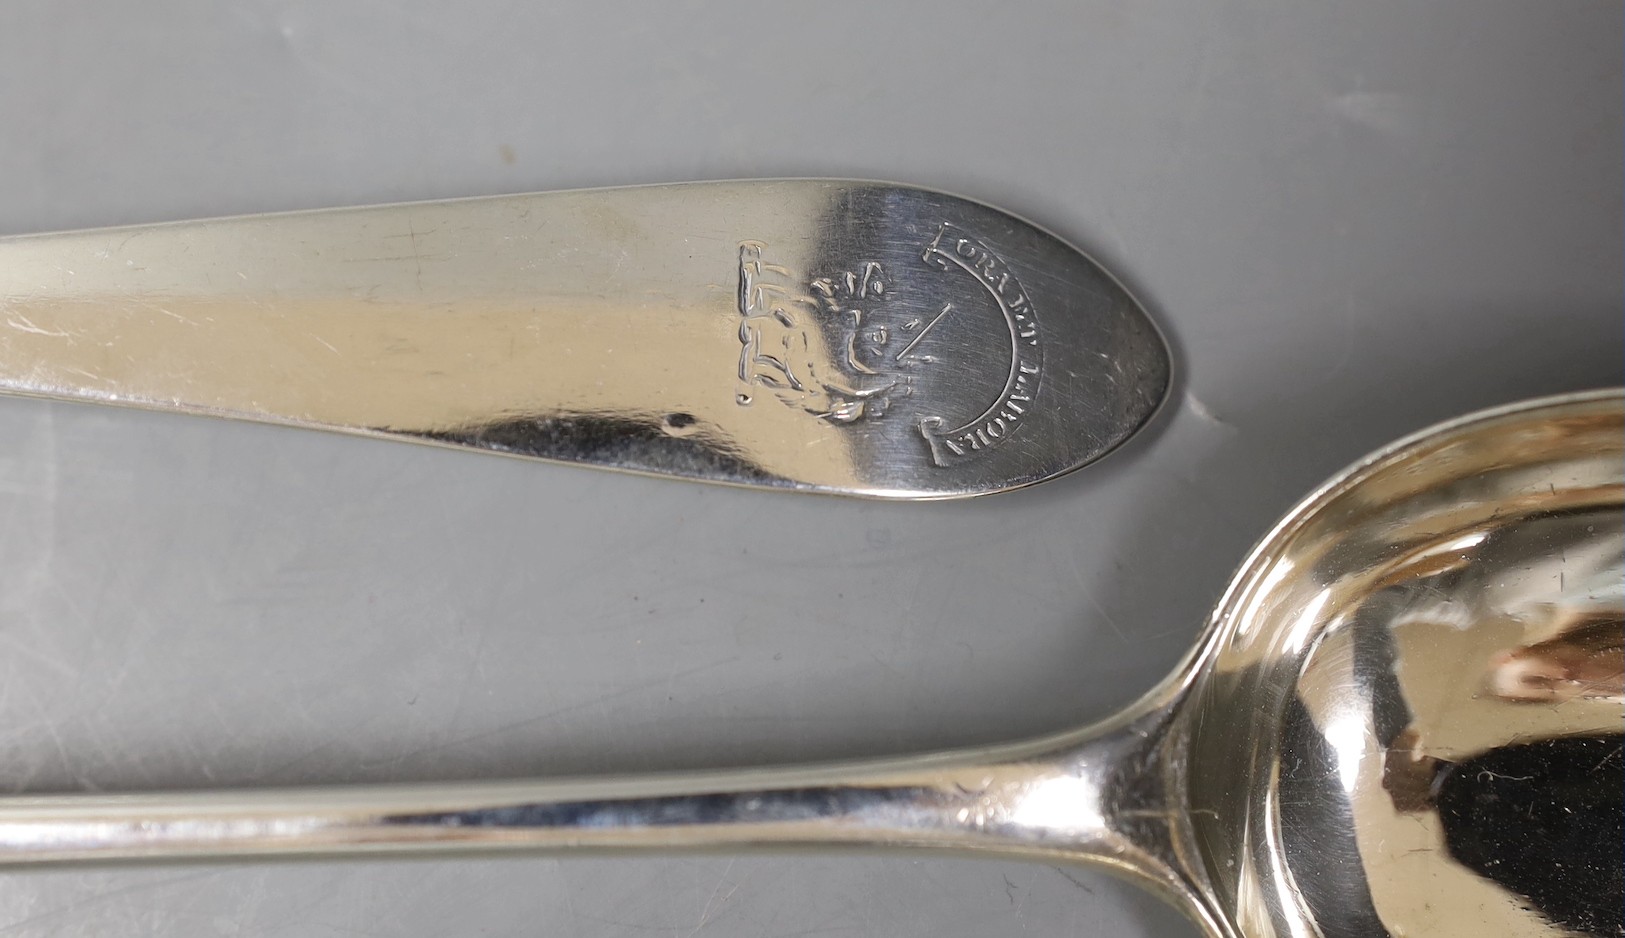 A pair of George III Scottish silver Celtic tip basting spoons, with engraved crest, Patrick Robertson, Edinburgh, 1790, 33.2cm, 7oz.